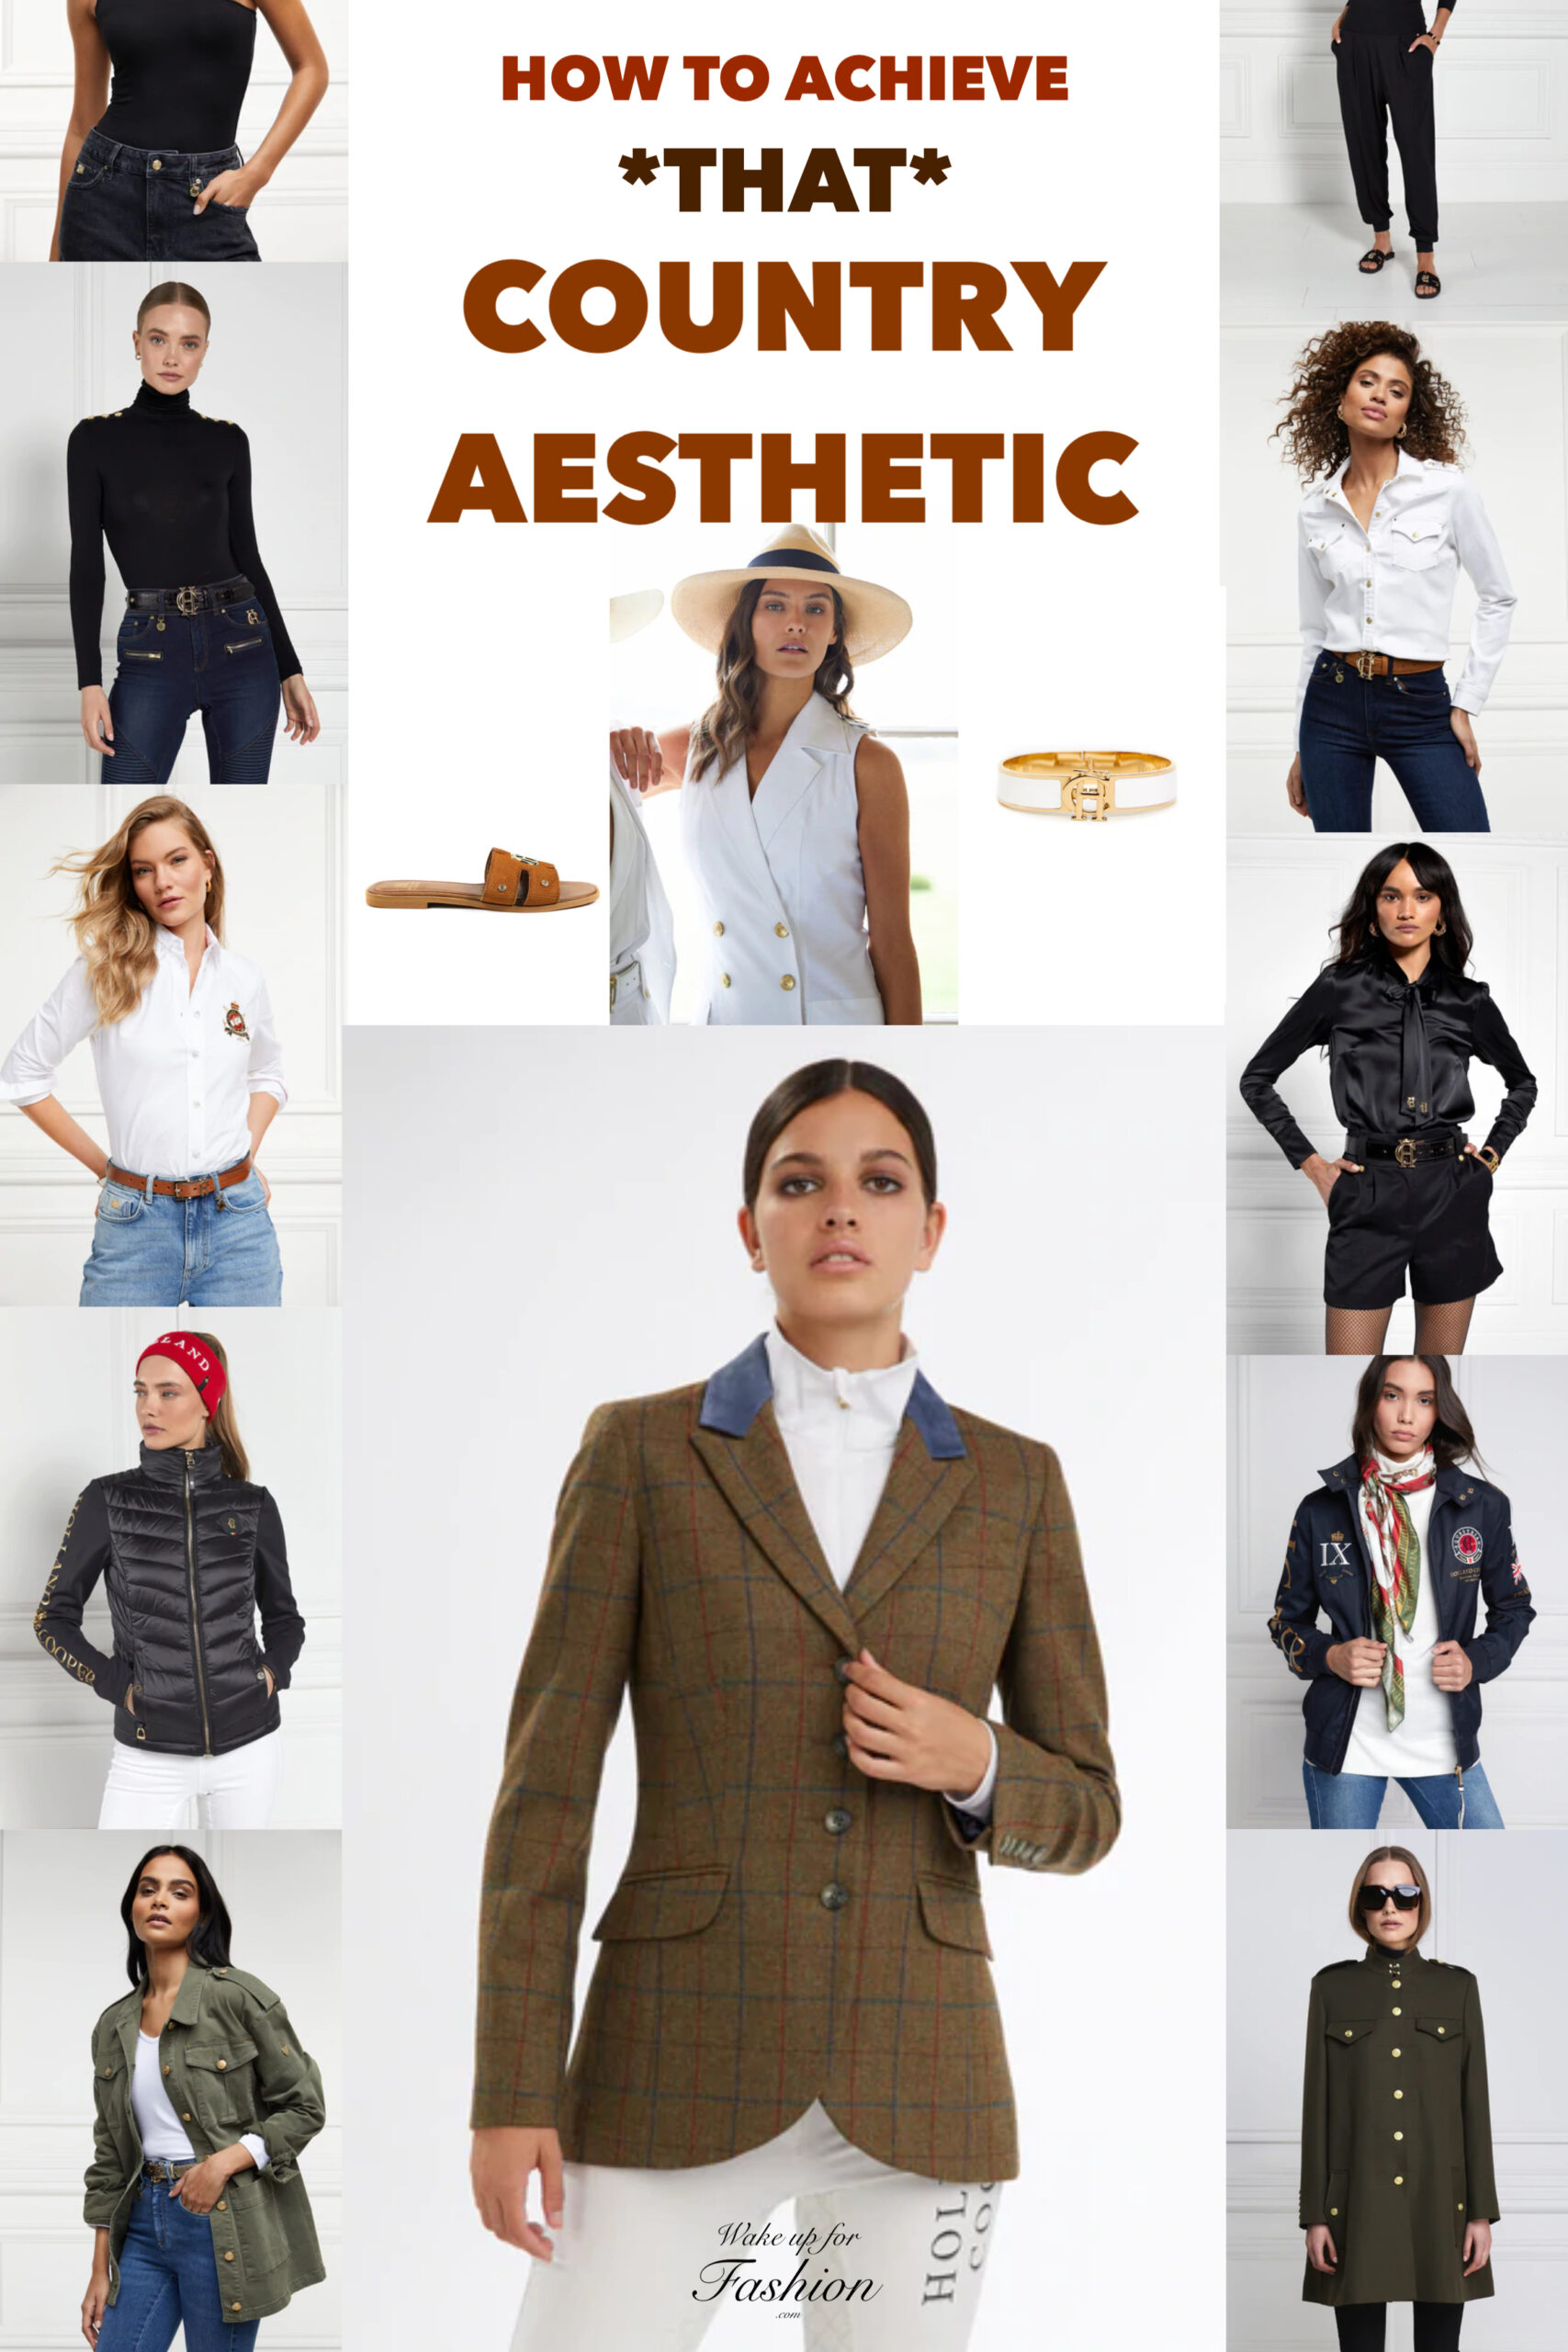 Aesthetic country clothing for women